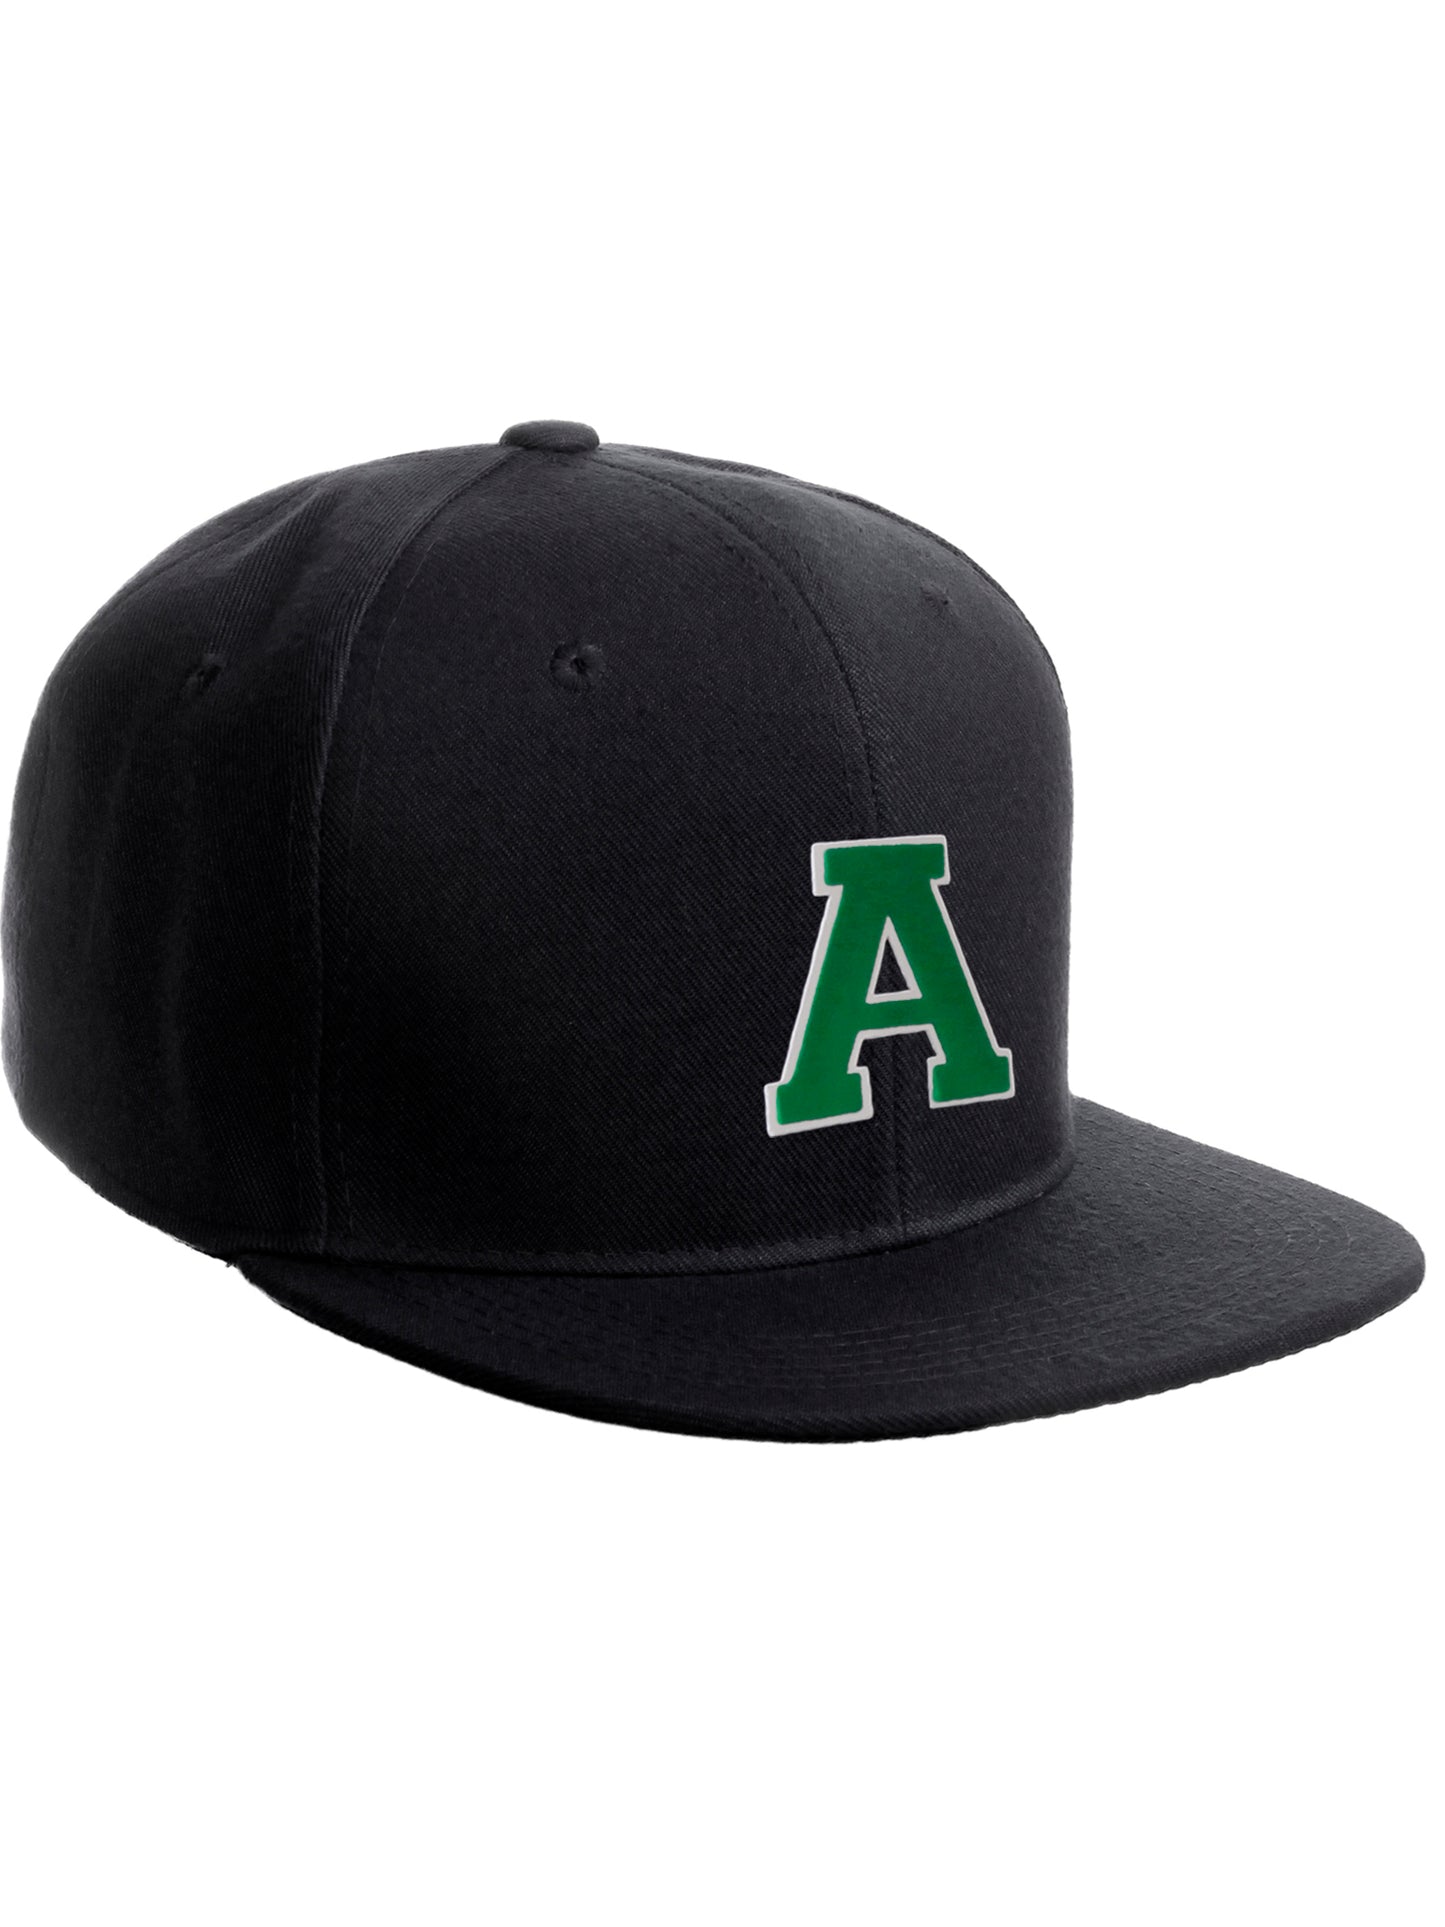 Classic Snapback Hat Custom A to Z Initial Raised Letters, Black Cap White Green